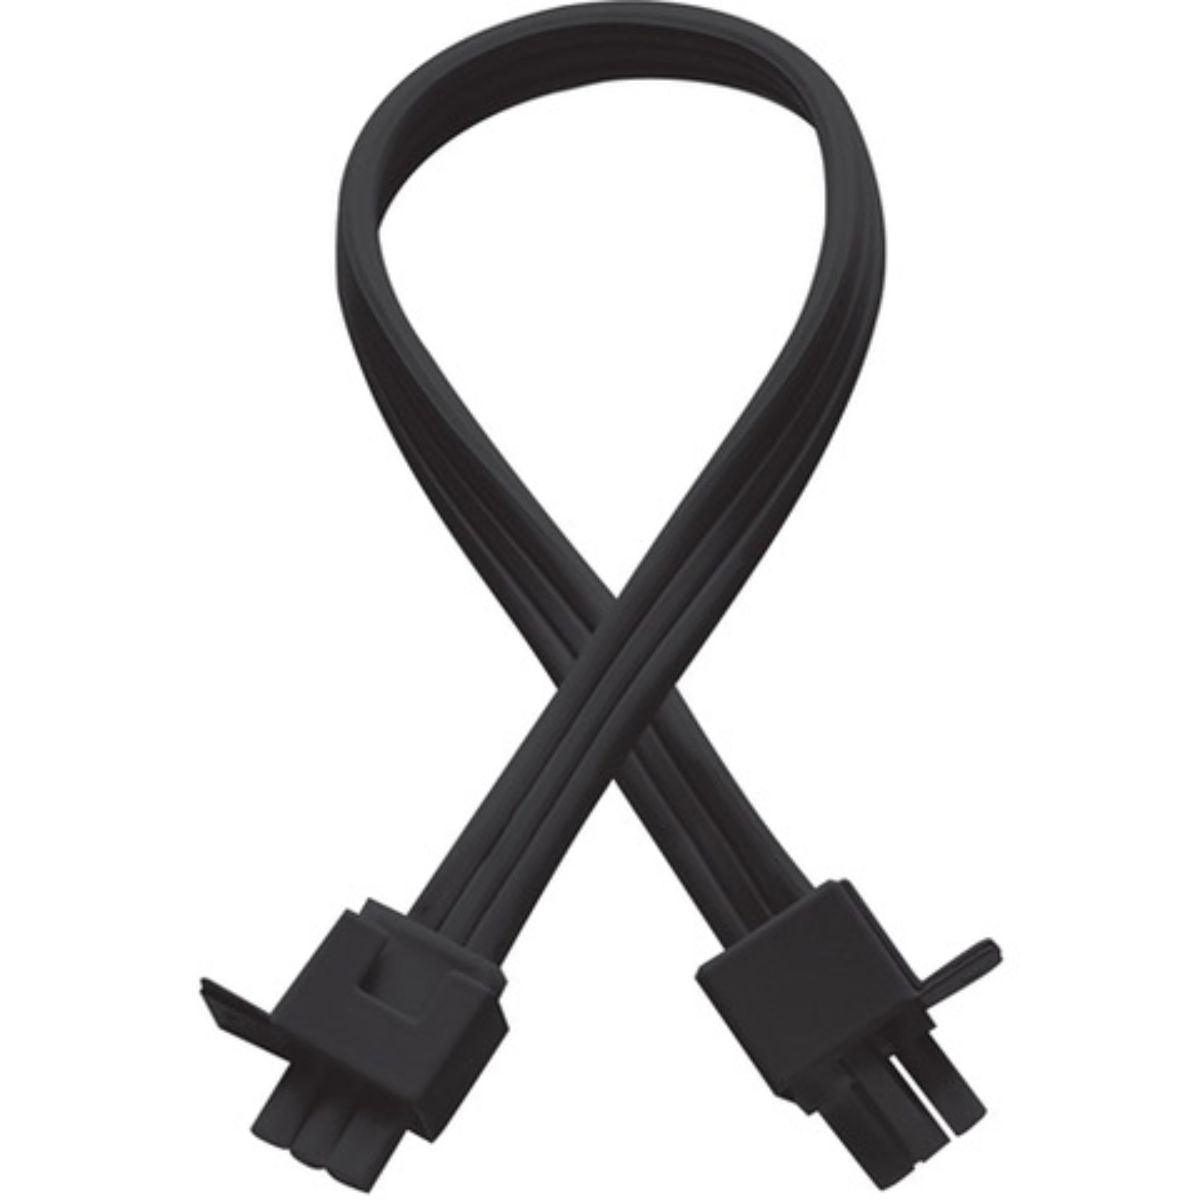 24in. Interconnect Cable For Undercabinet Lights, Black Finish - Bees Lighting